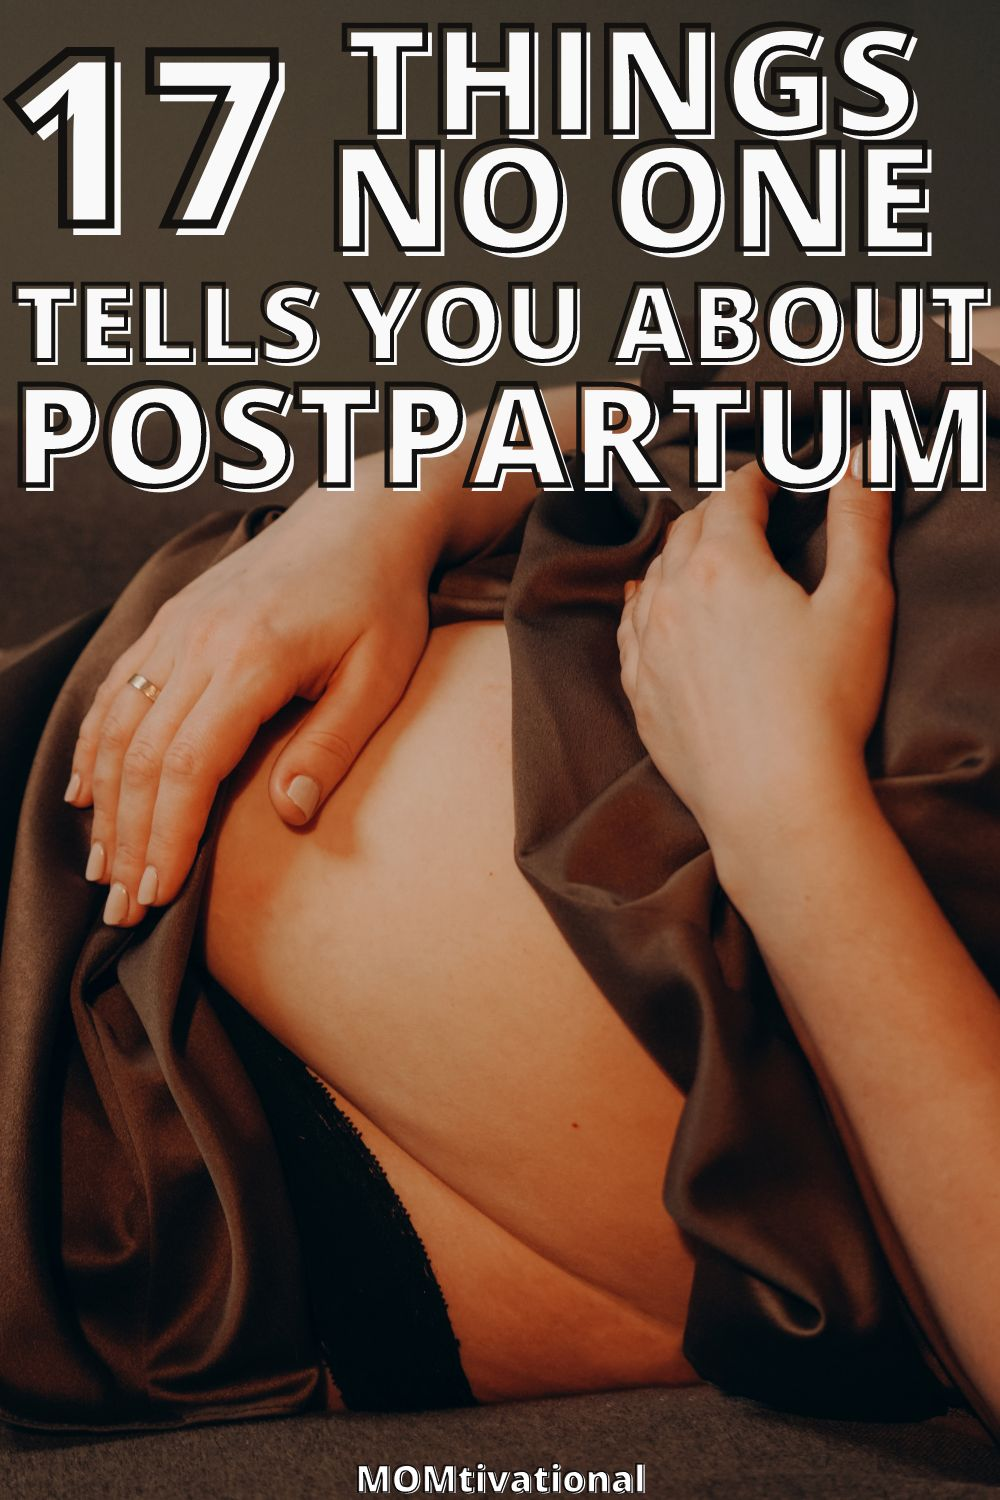 17 things no one tells you about postpartum: Postpartum body and belly after vaginal birth